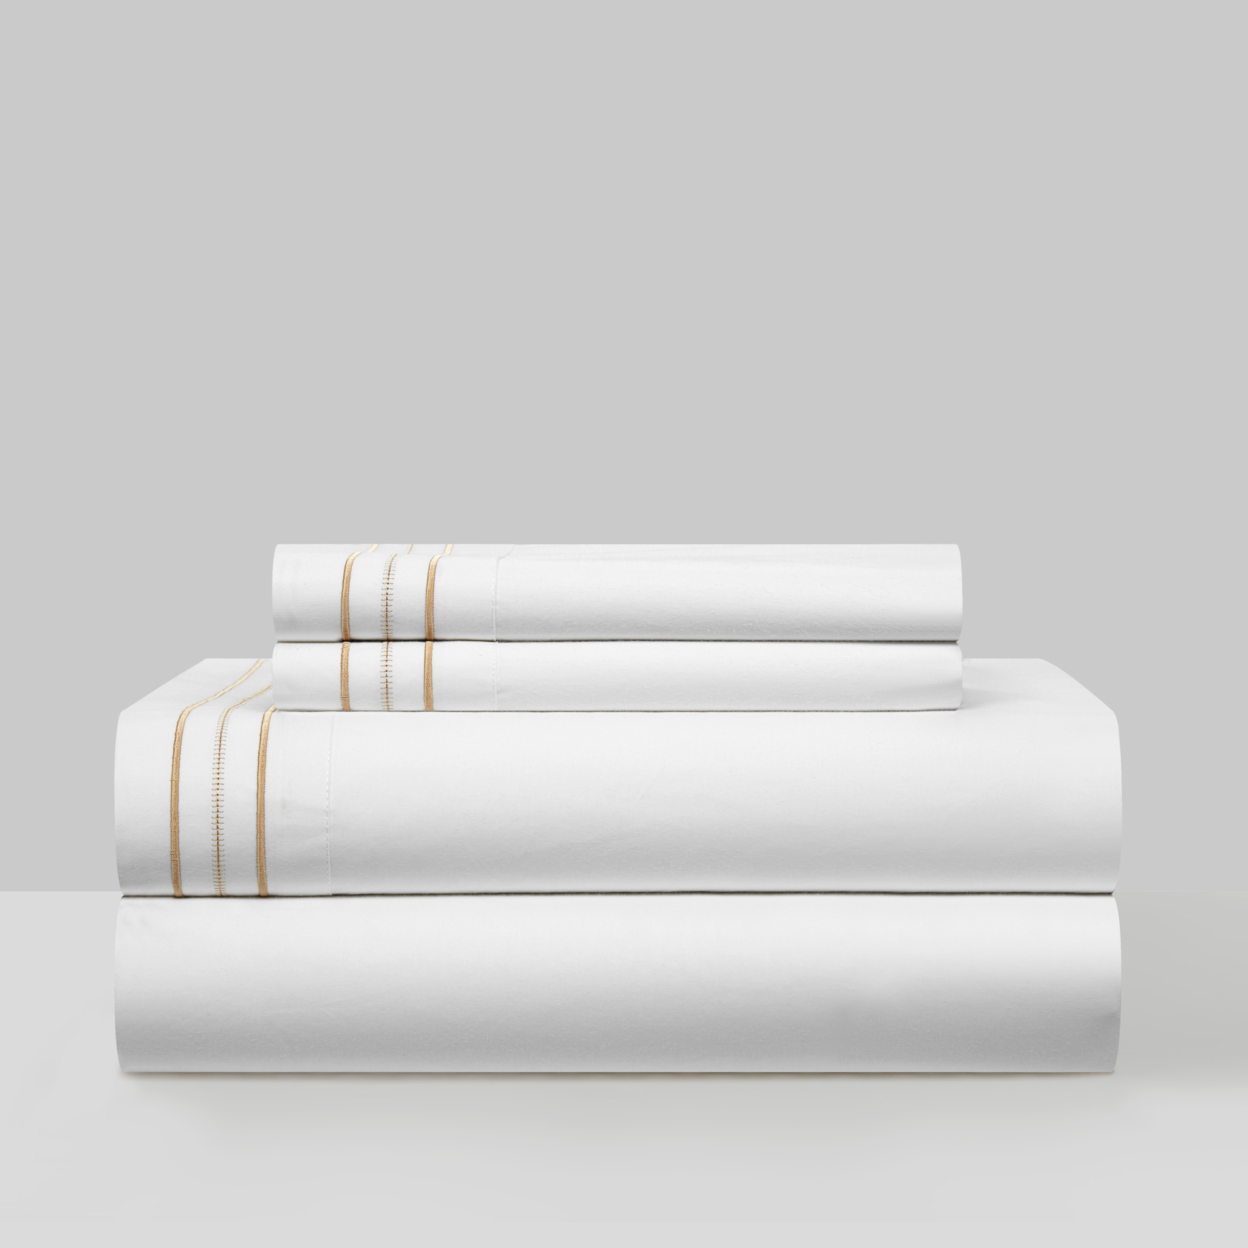 4 Piece Freeya Organic Cotton Sheet Set Solid White With Dual Stripe Embroidery - Gold, Queen